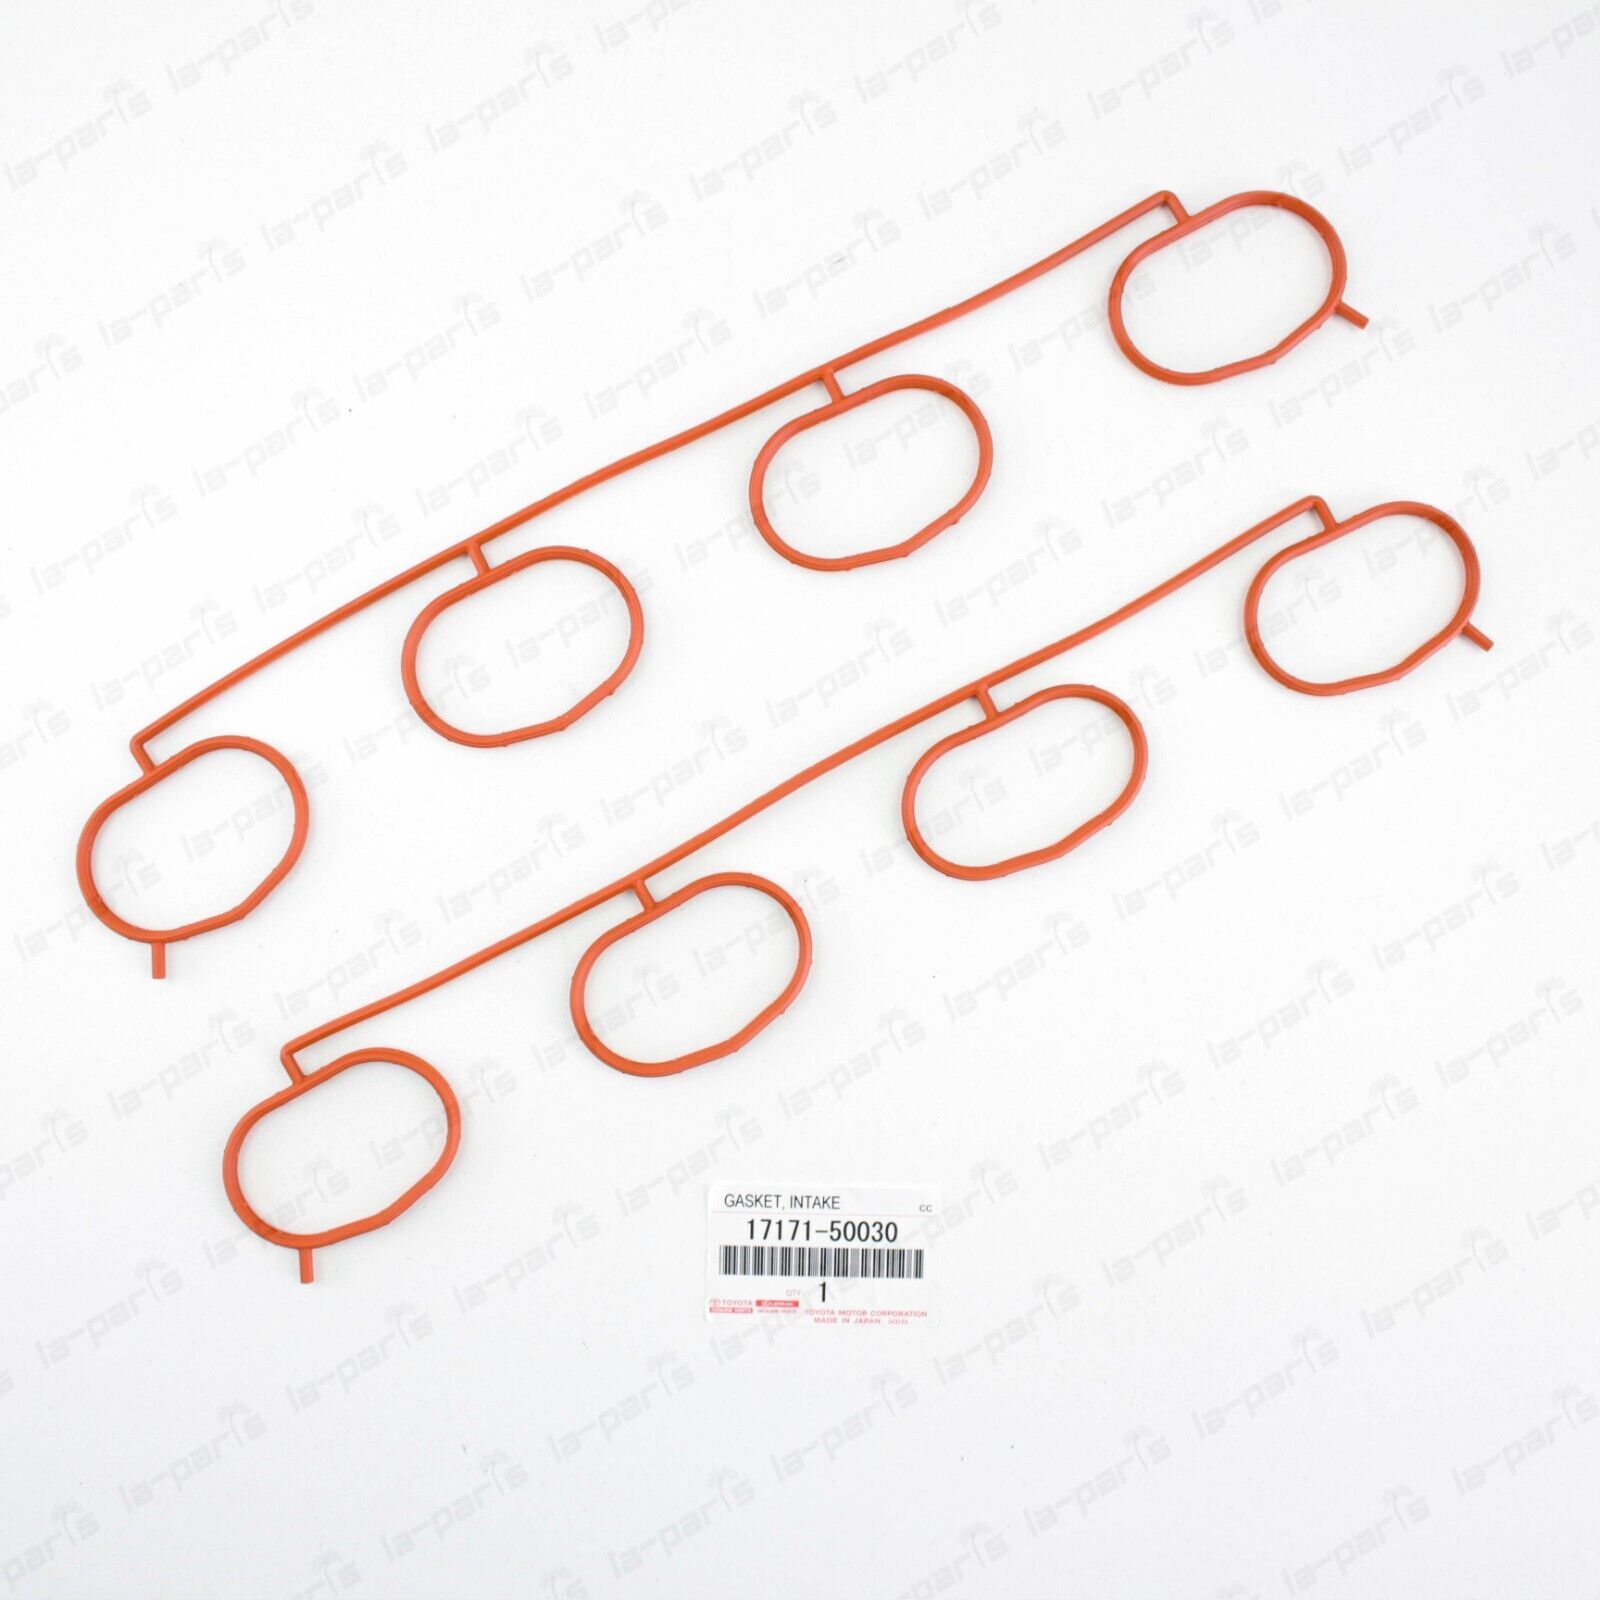 Primary image for New Genuine Toyota 4Runner Tundra GX470 4.7l Lower Intake Manifold Gasket PAIR